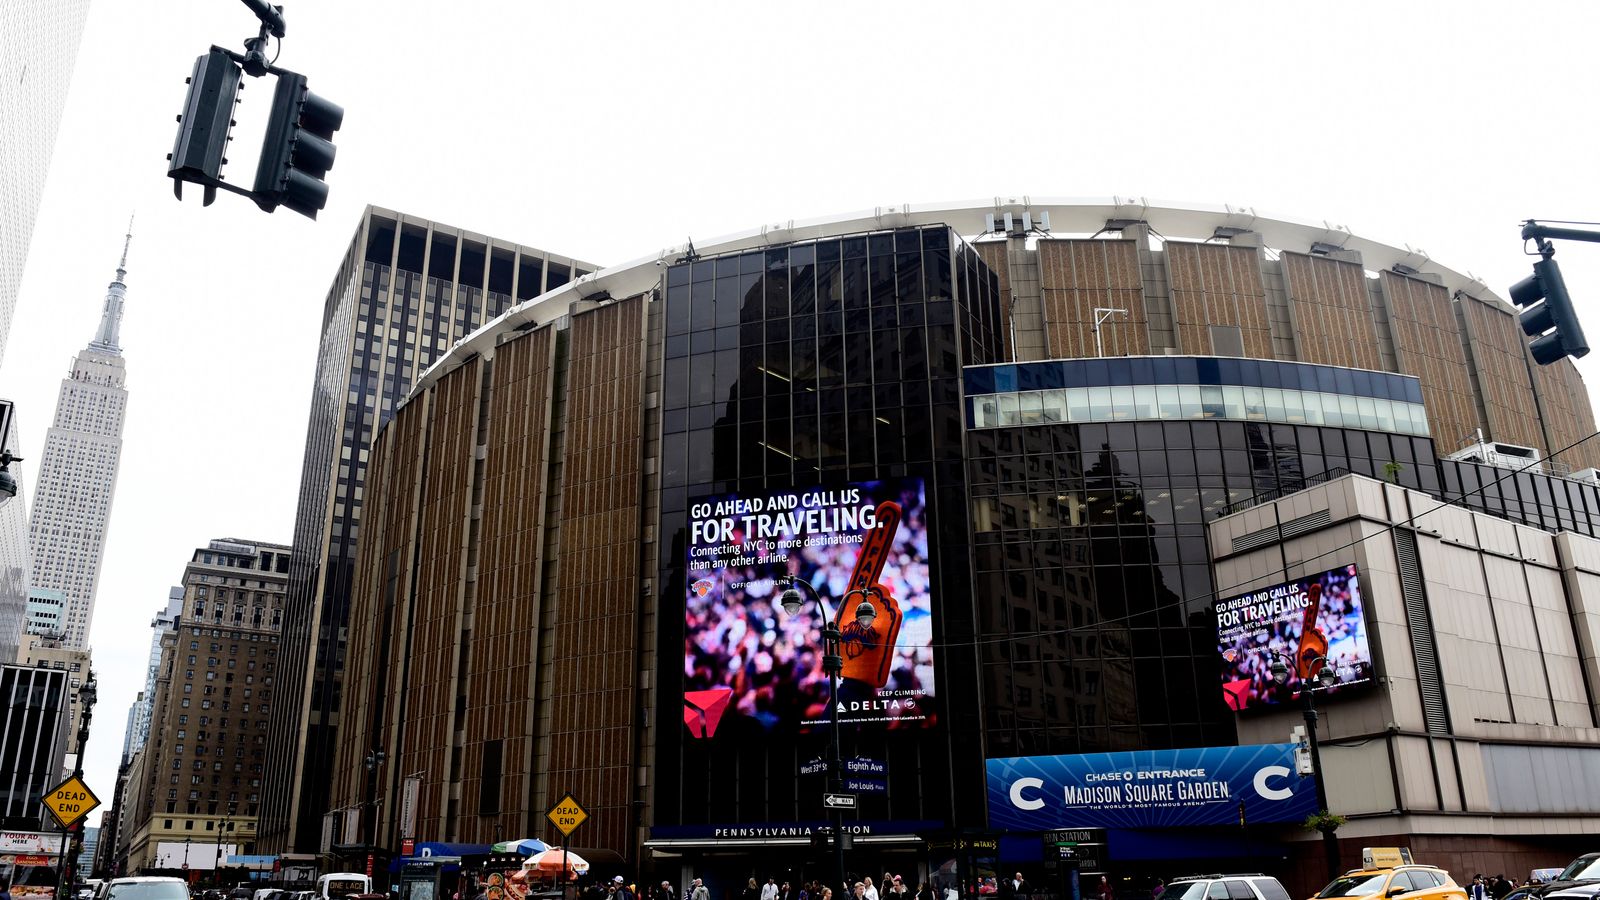 Madison Square Garden - New York City's Most Famous Indoor Arena